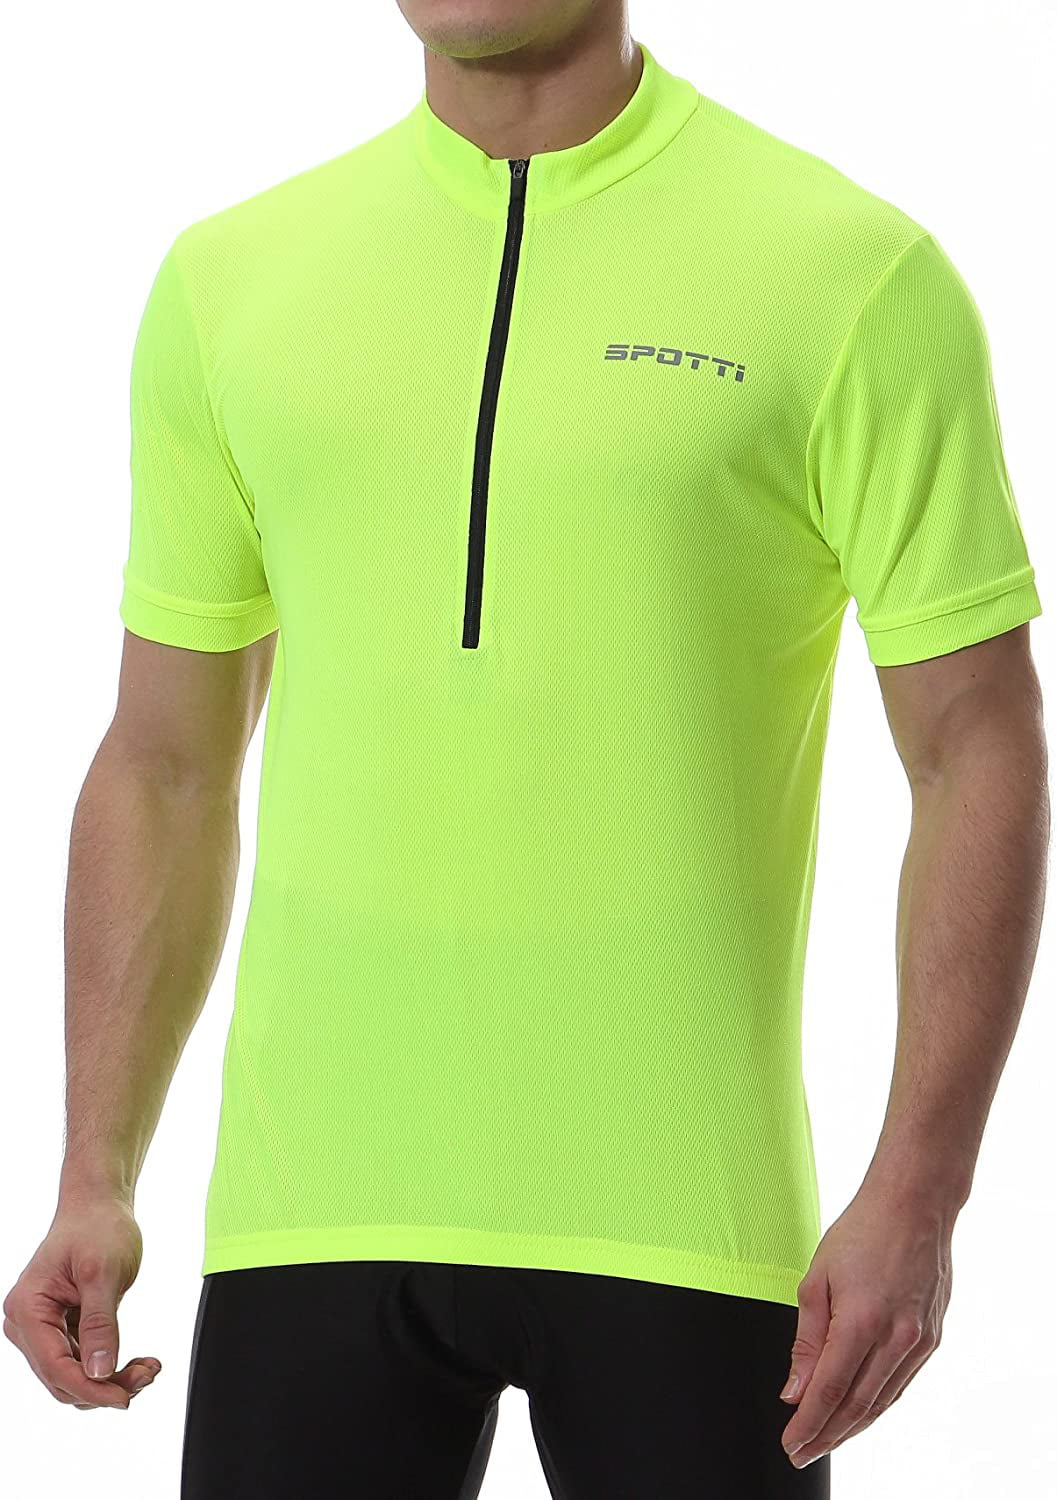 Breathable Mens Cycling Jersey Quick Dry Bike Short Sleeve Shirt with 3 Rear Pockets-Green S 